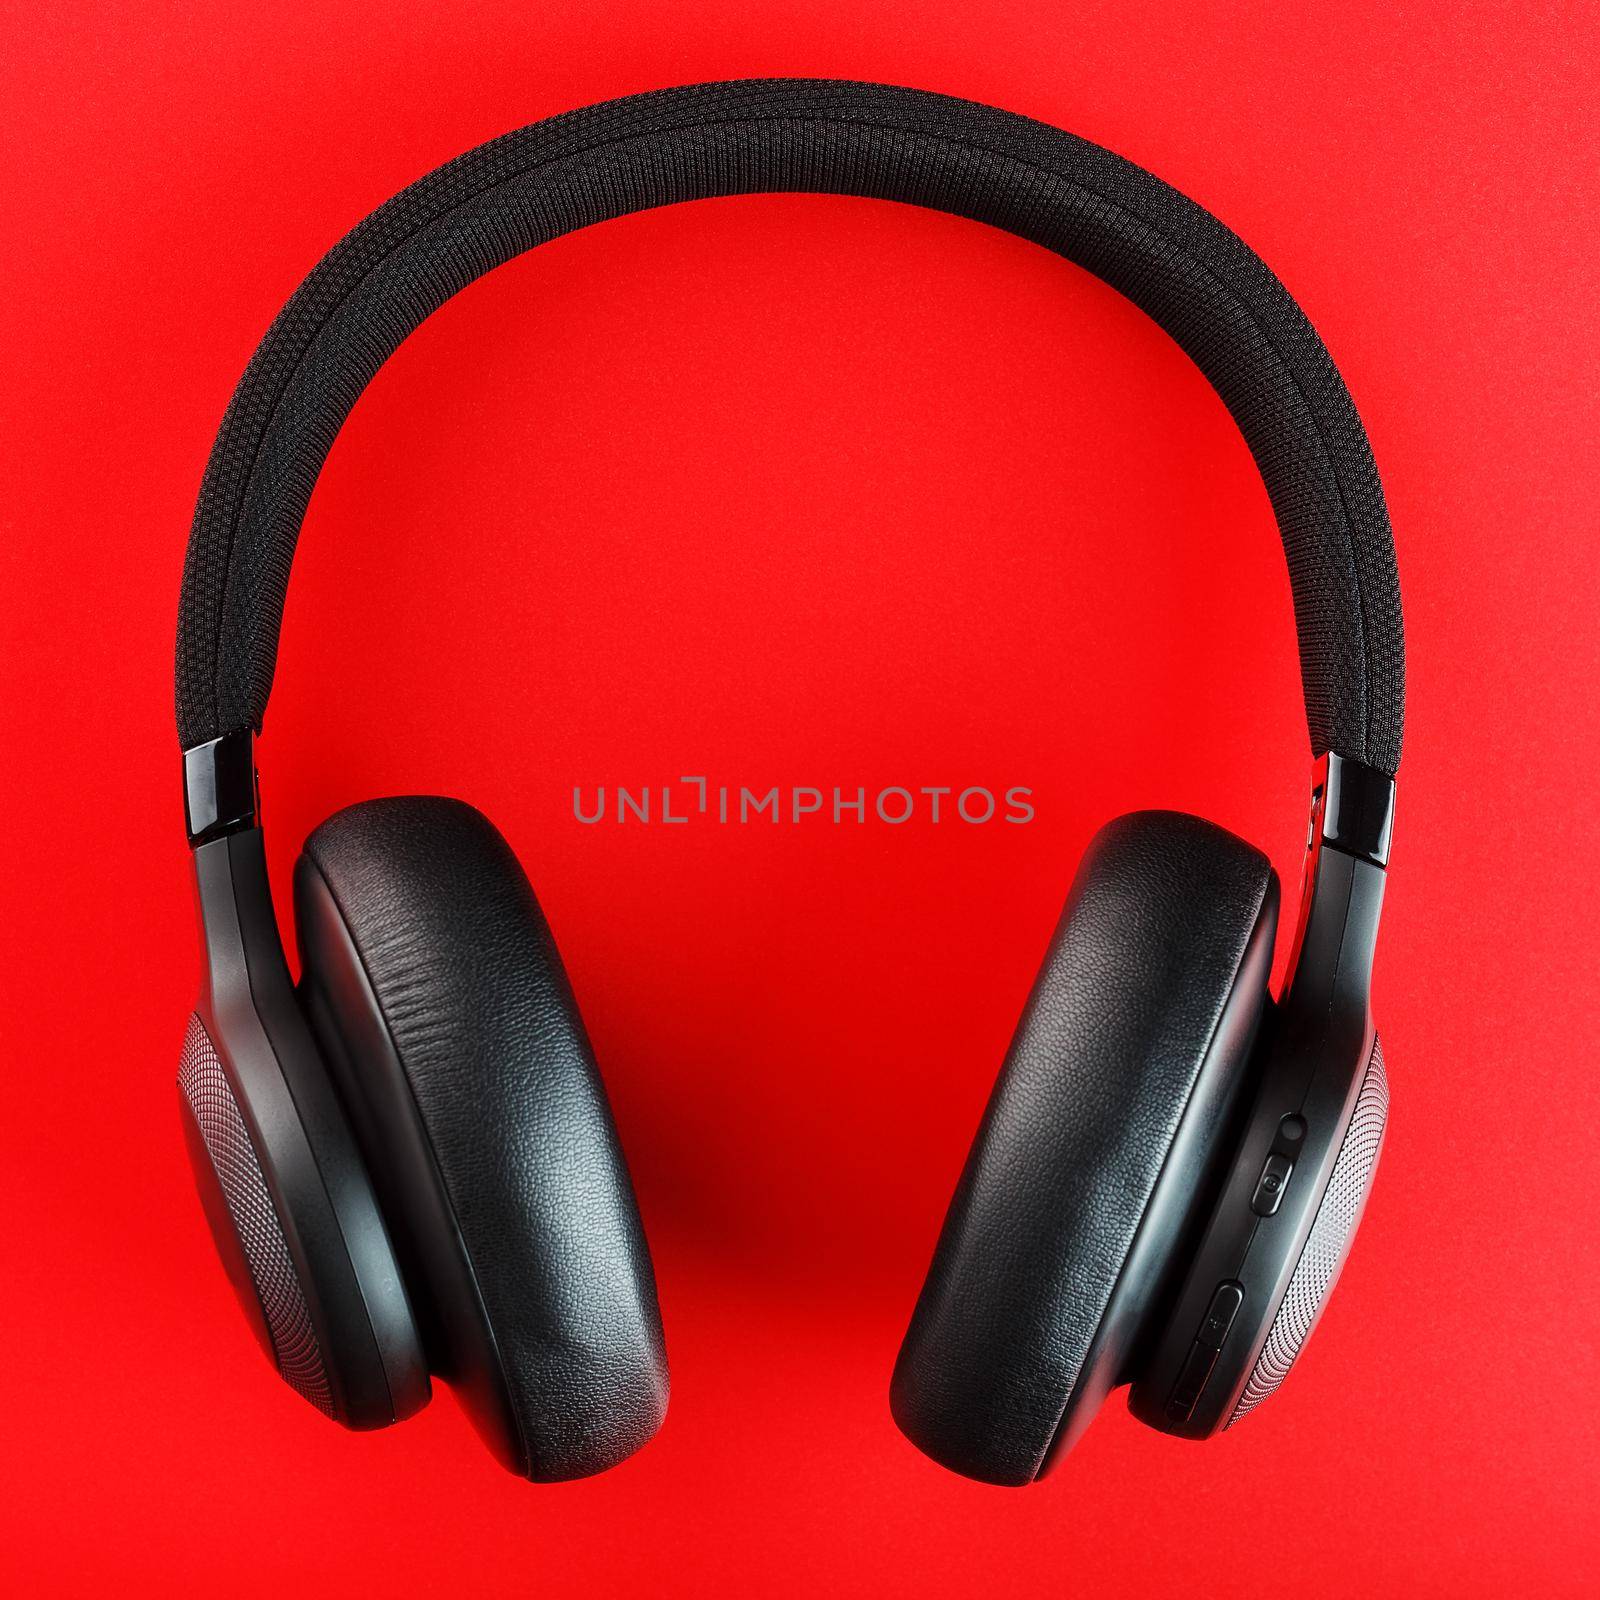 Black bluetooth headphones on a red background top view. In-Ear Headphones for DJs by AlexGrec